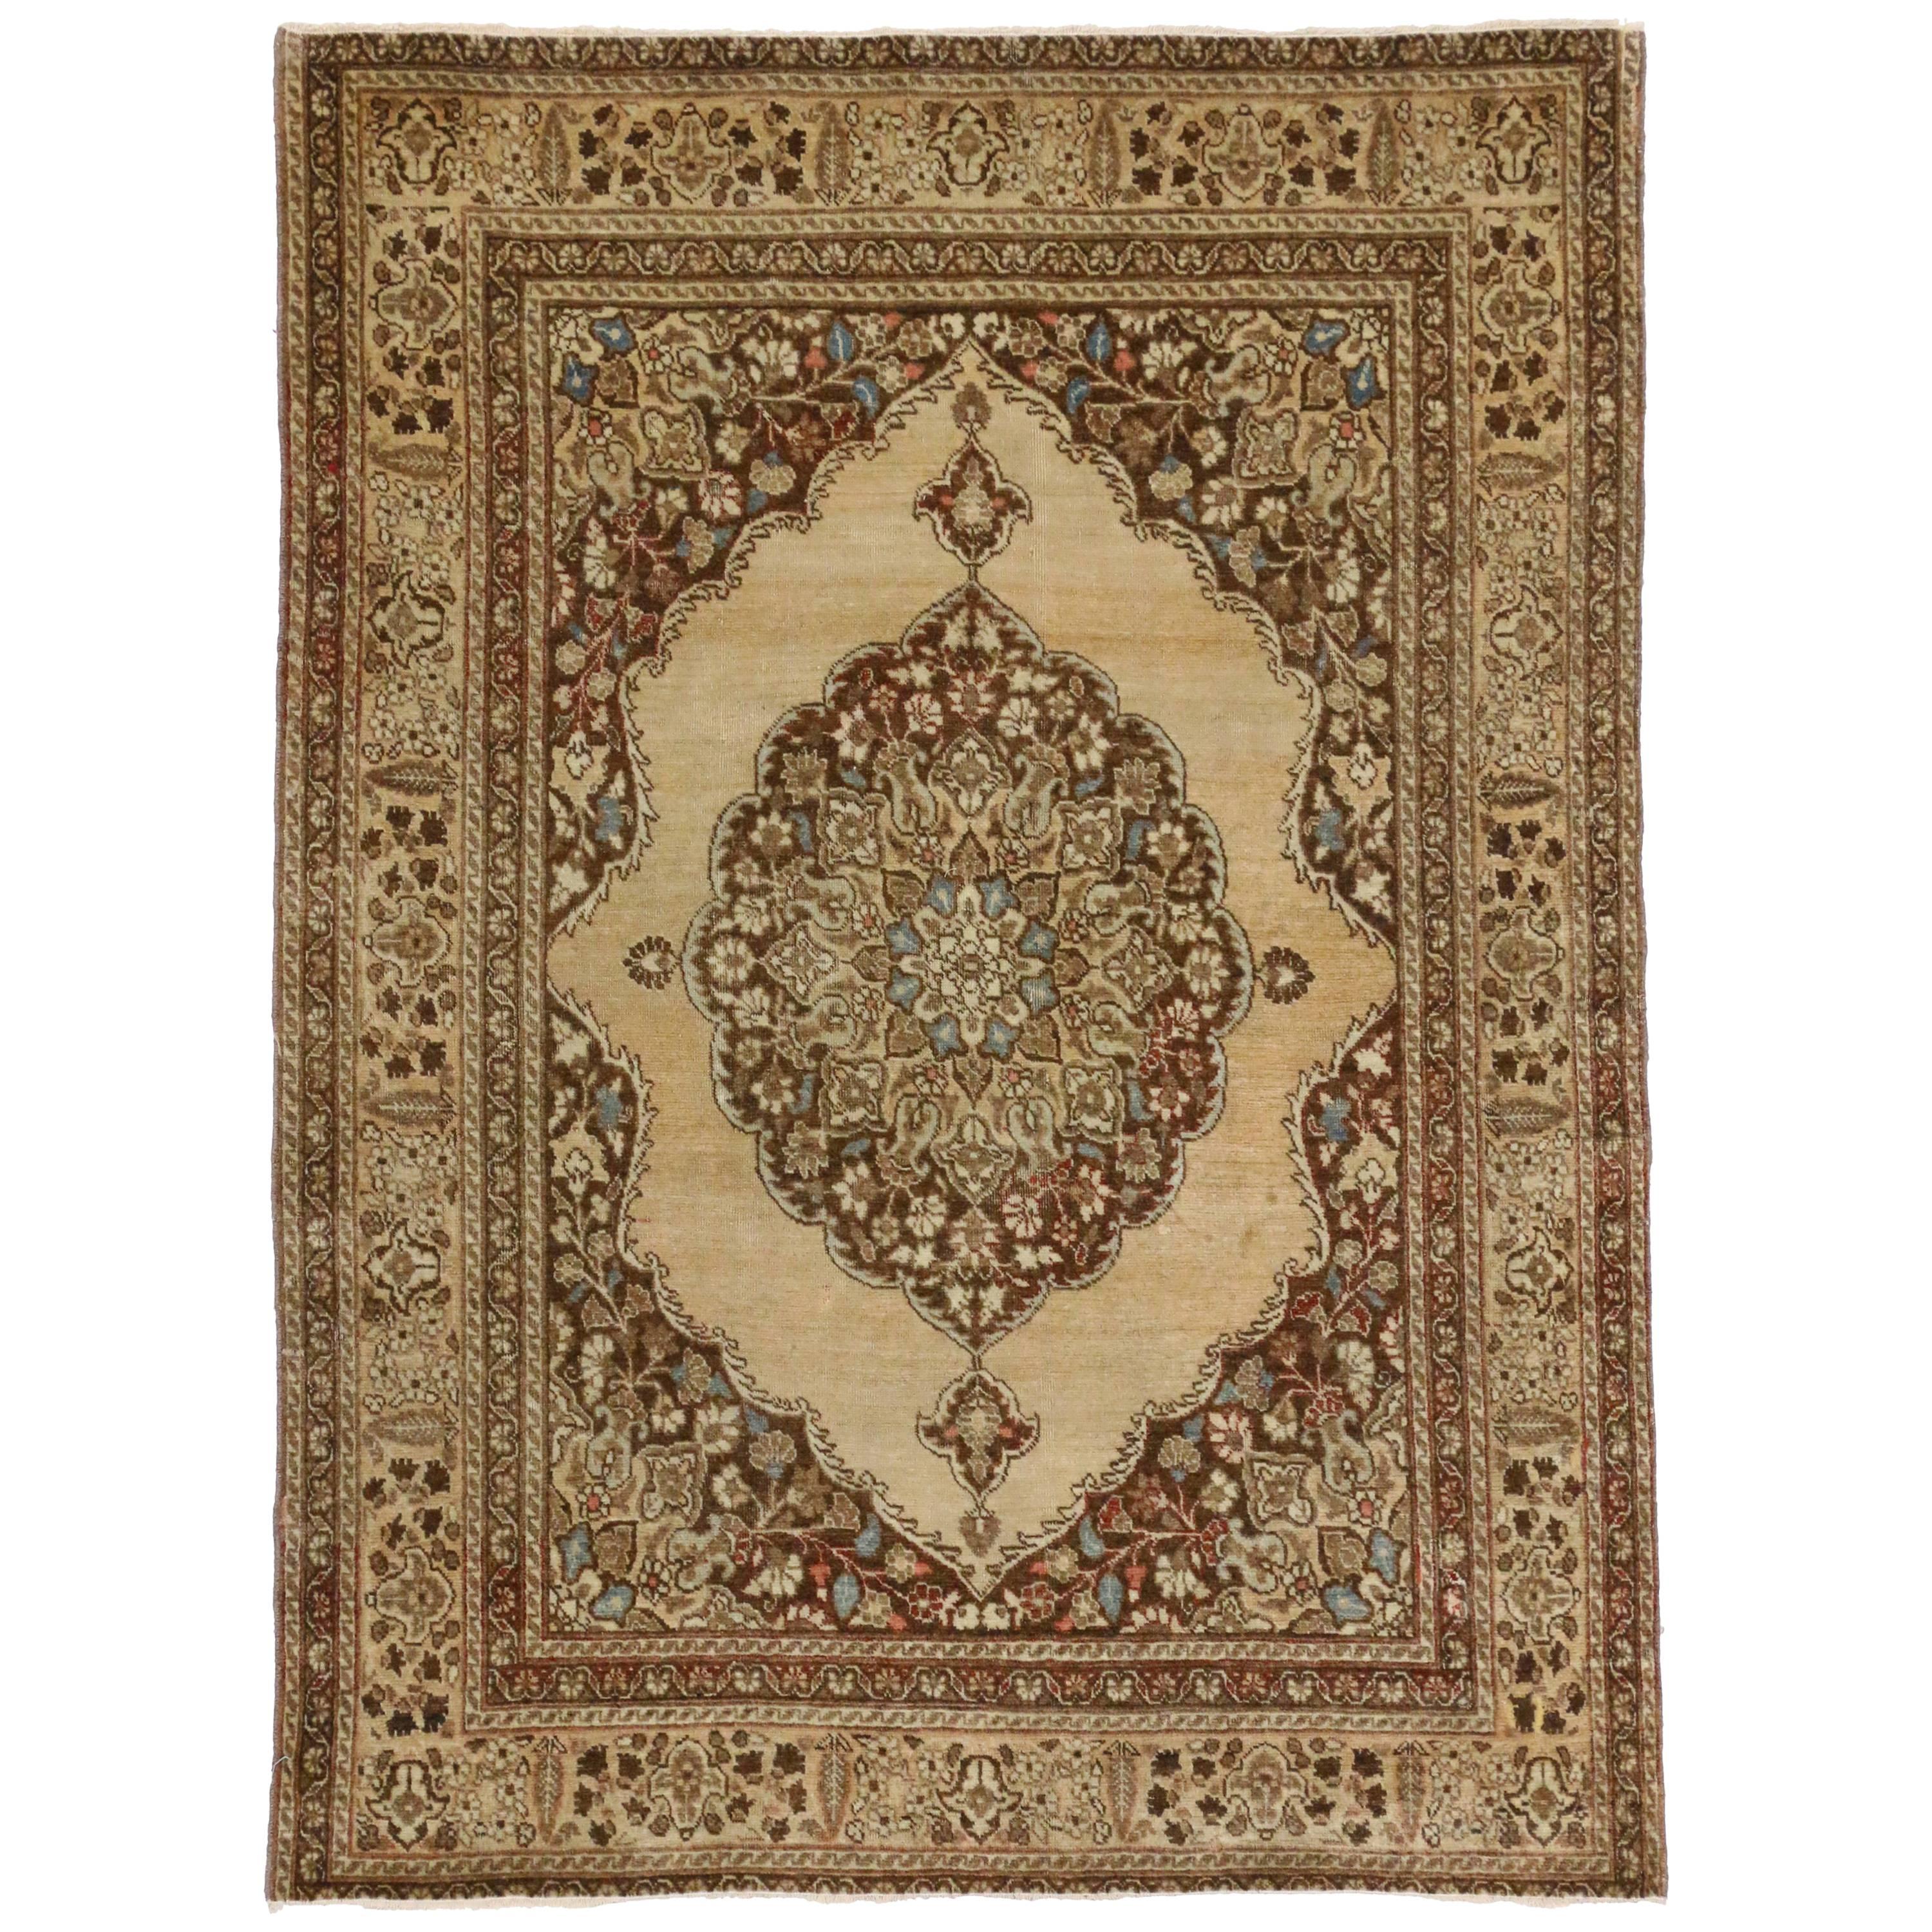 Distressed Antique Persian Tabriz Accent Rug with Rustic Artisan Style